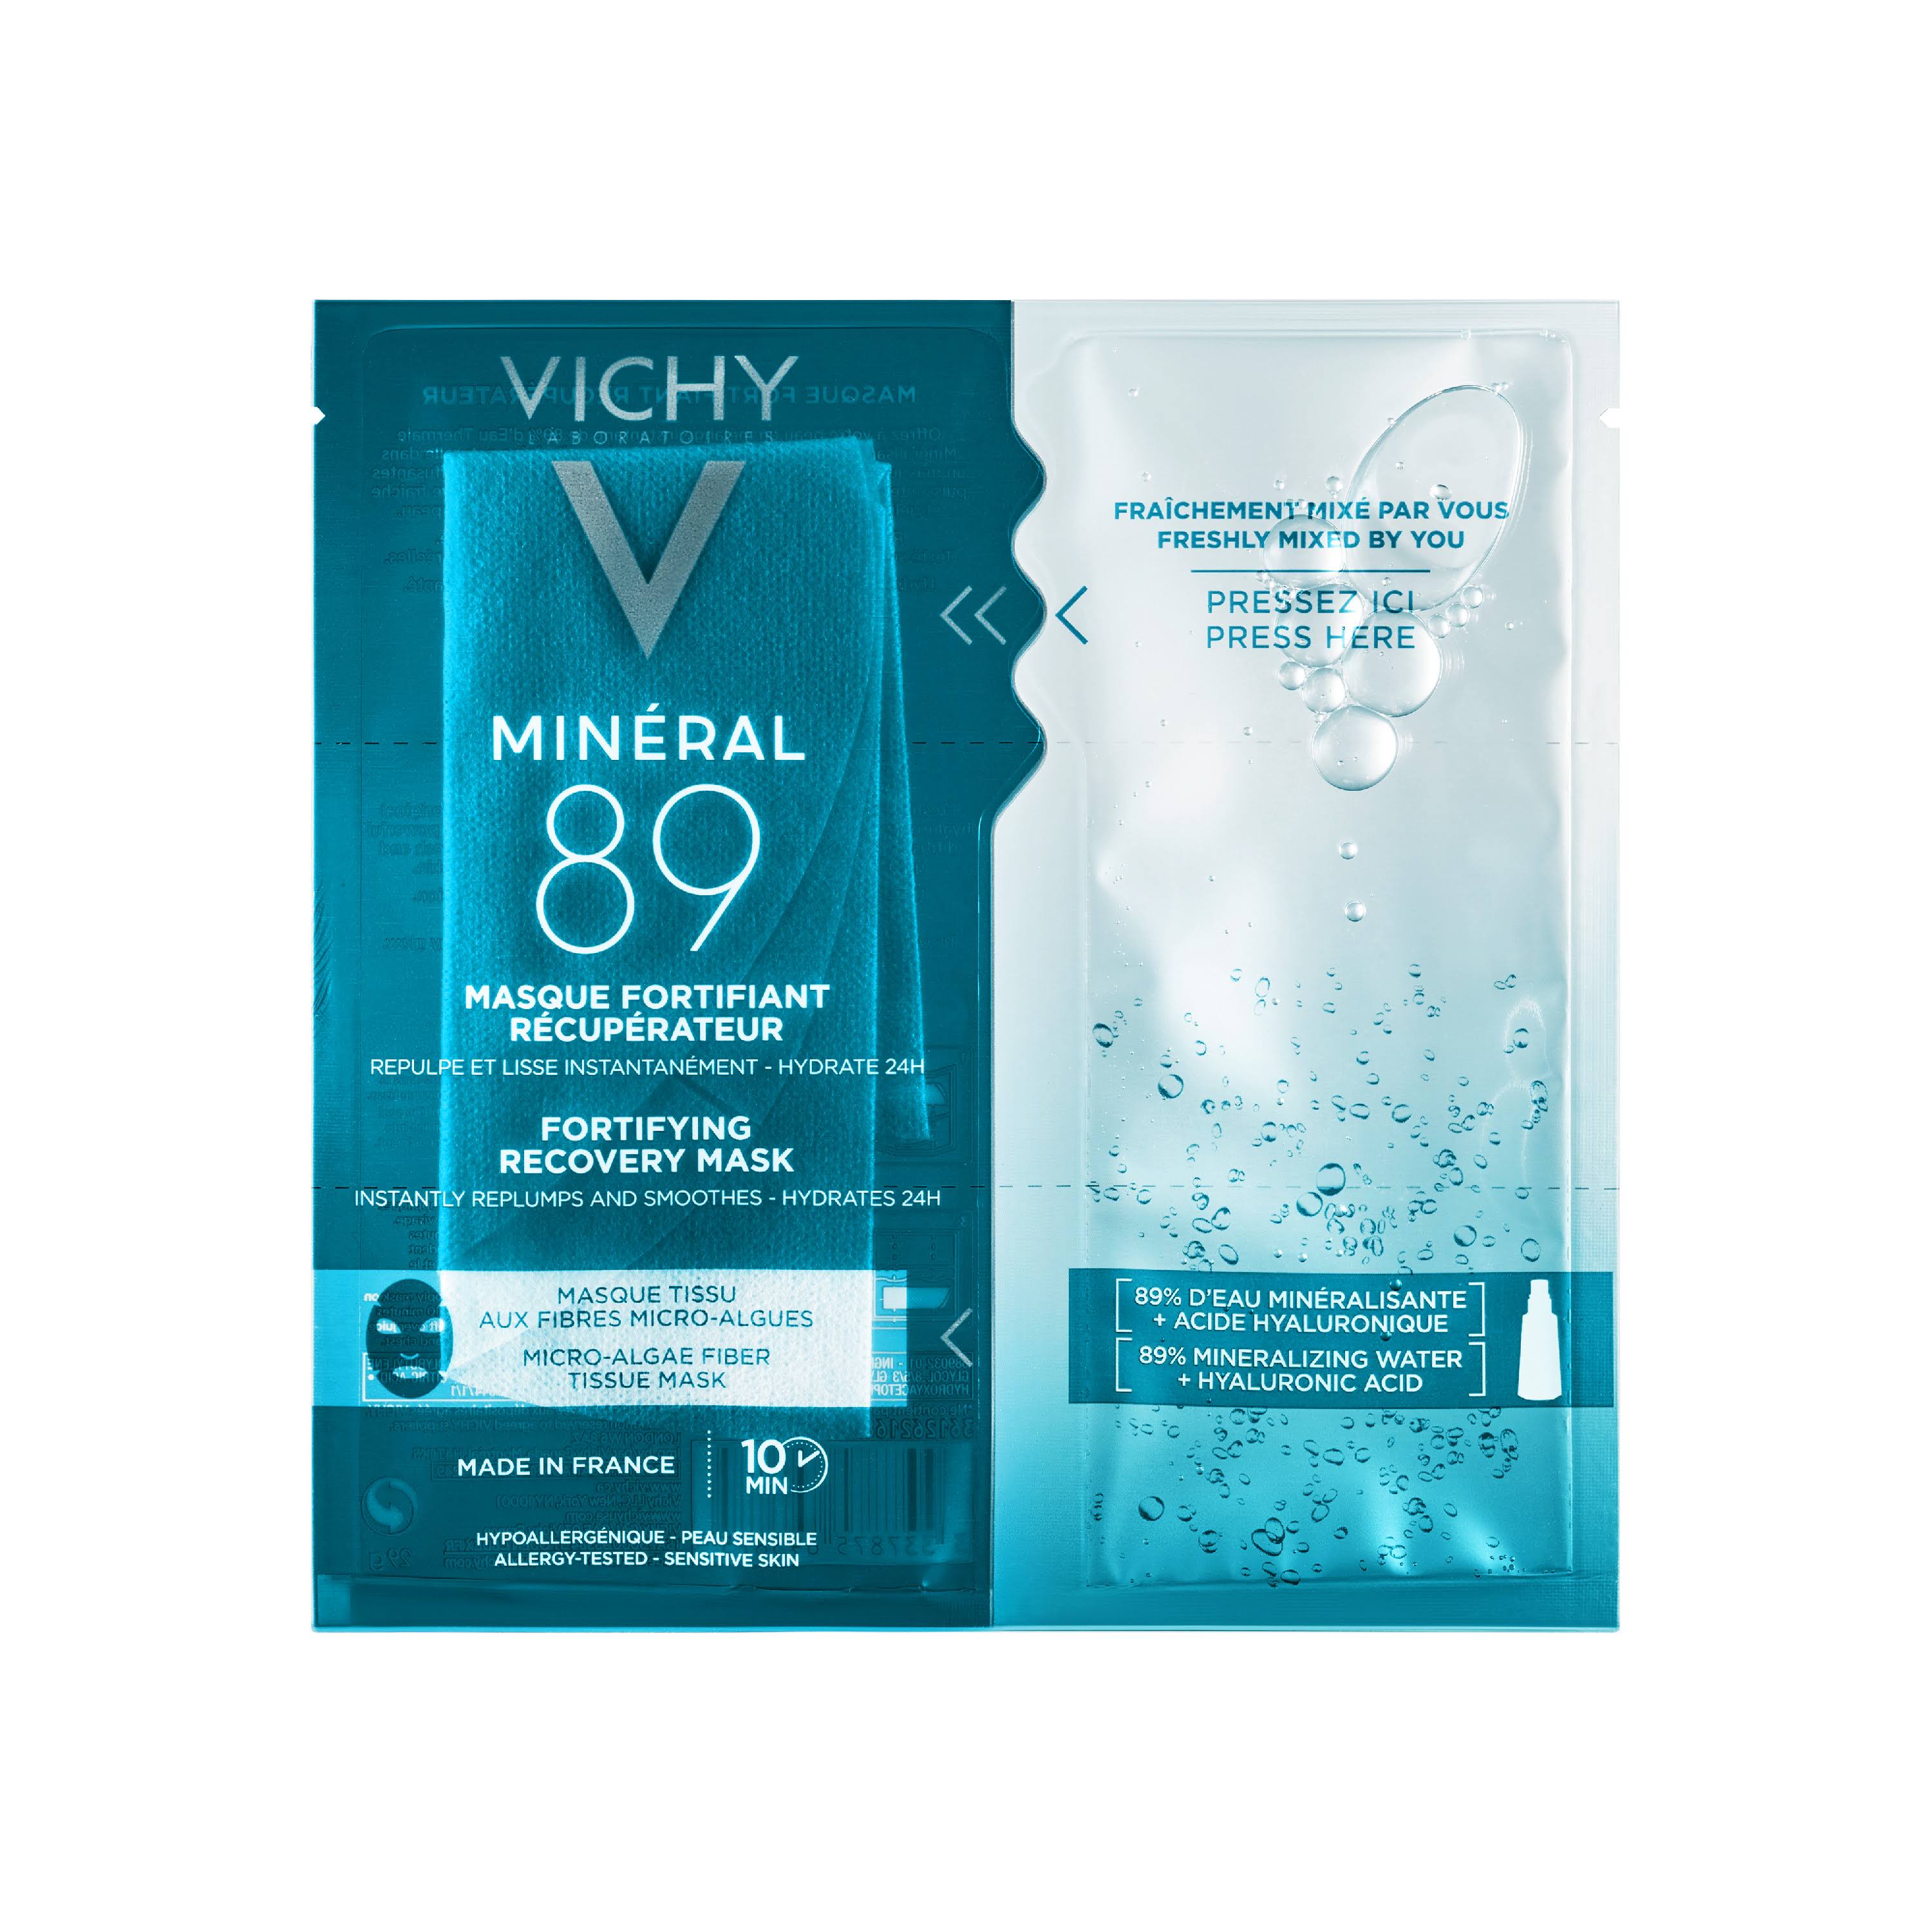 Vichy Mineral 89 Fortifying Recovery Mask 29g